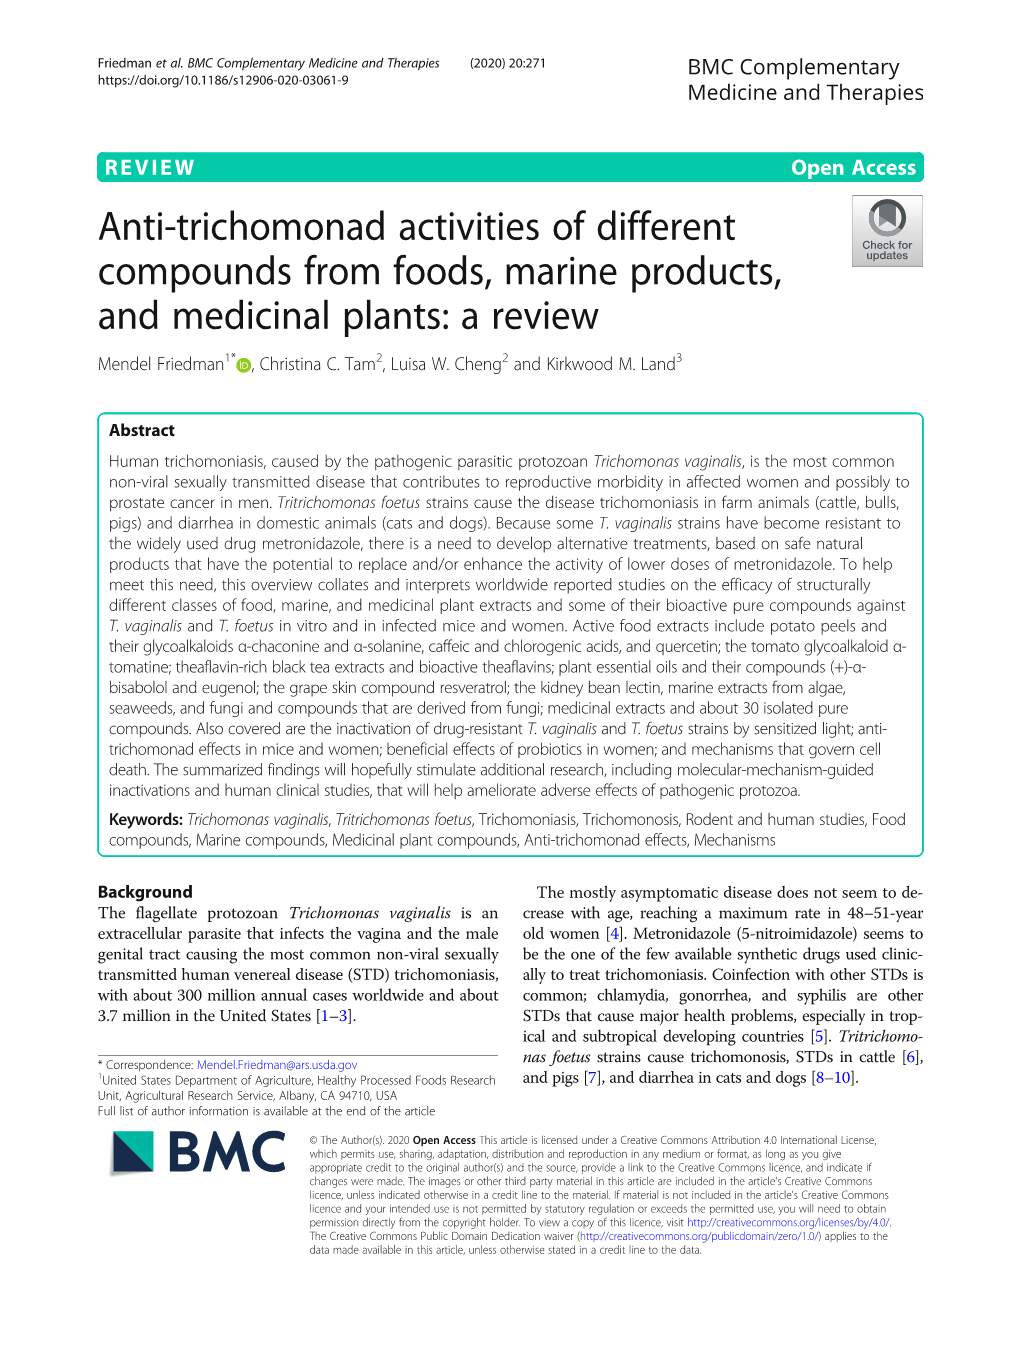 Anti-Trichomonad Activities of Different Compounds from Foods, Marine Products, and Medicinal Plants: a Review Mendel Friedman1* , Christina C